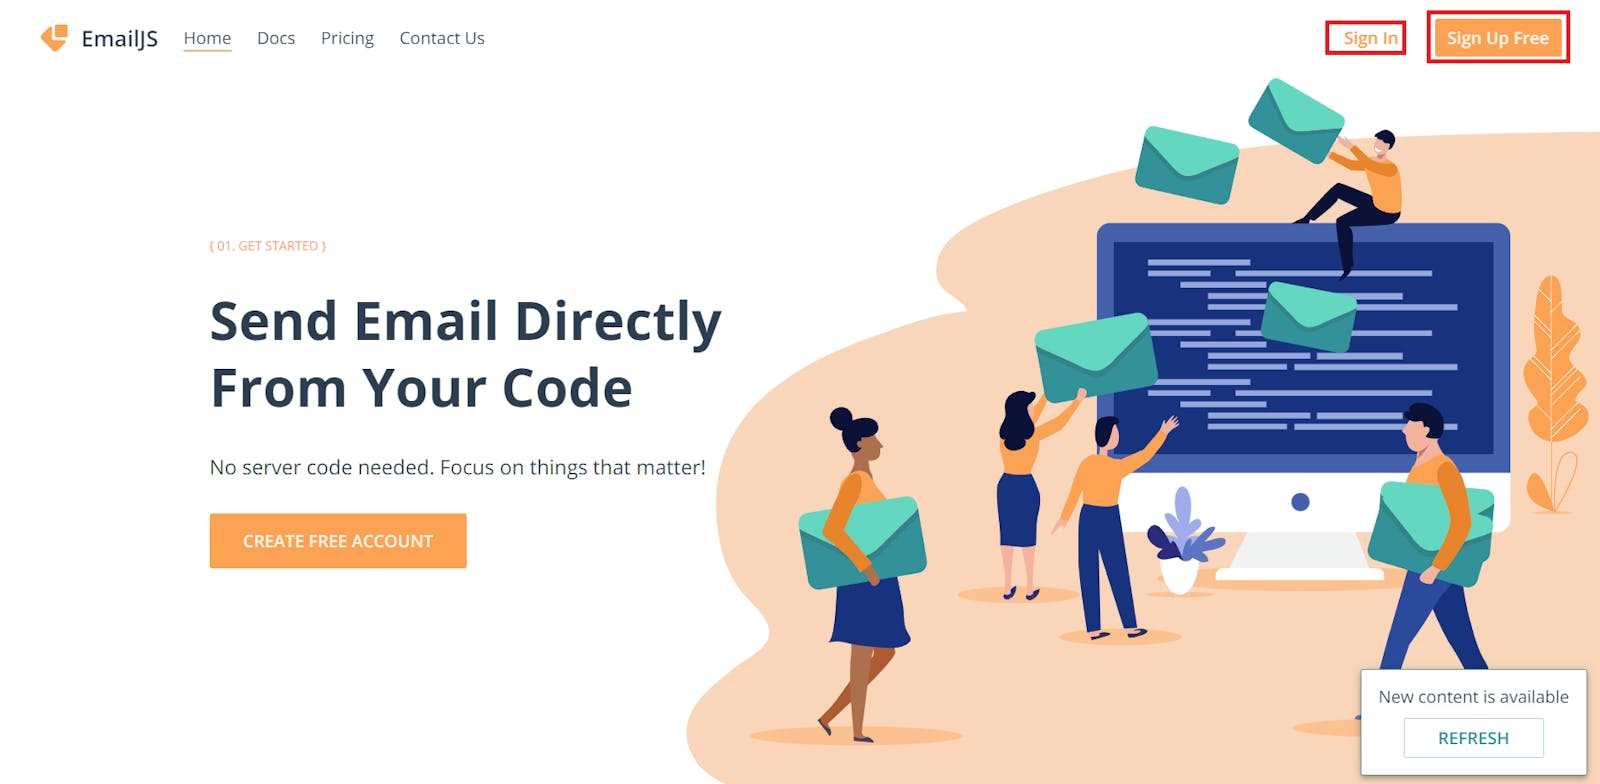 How to use EmailJS for a Contact Us page